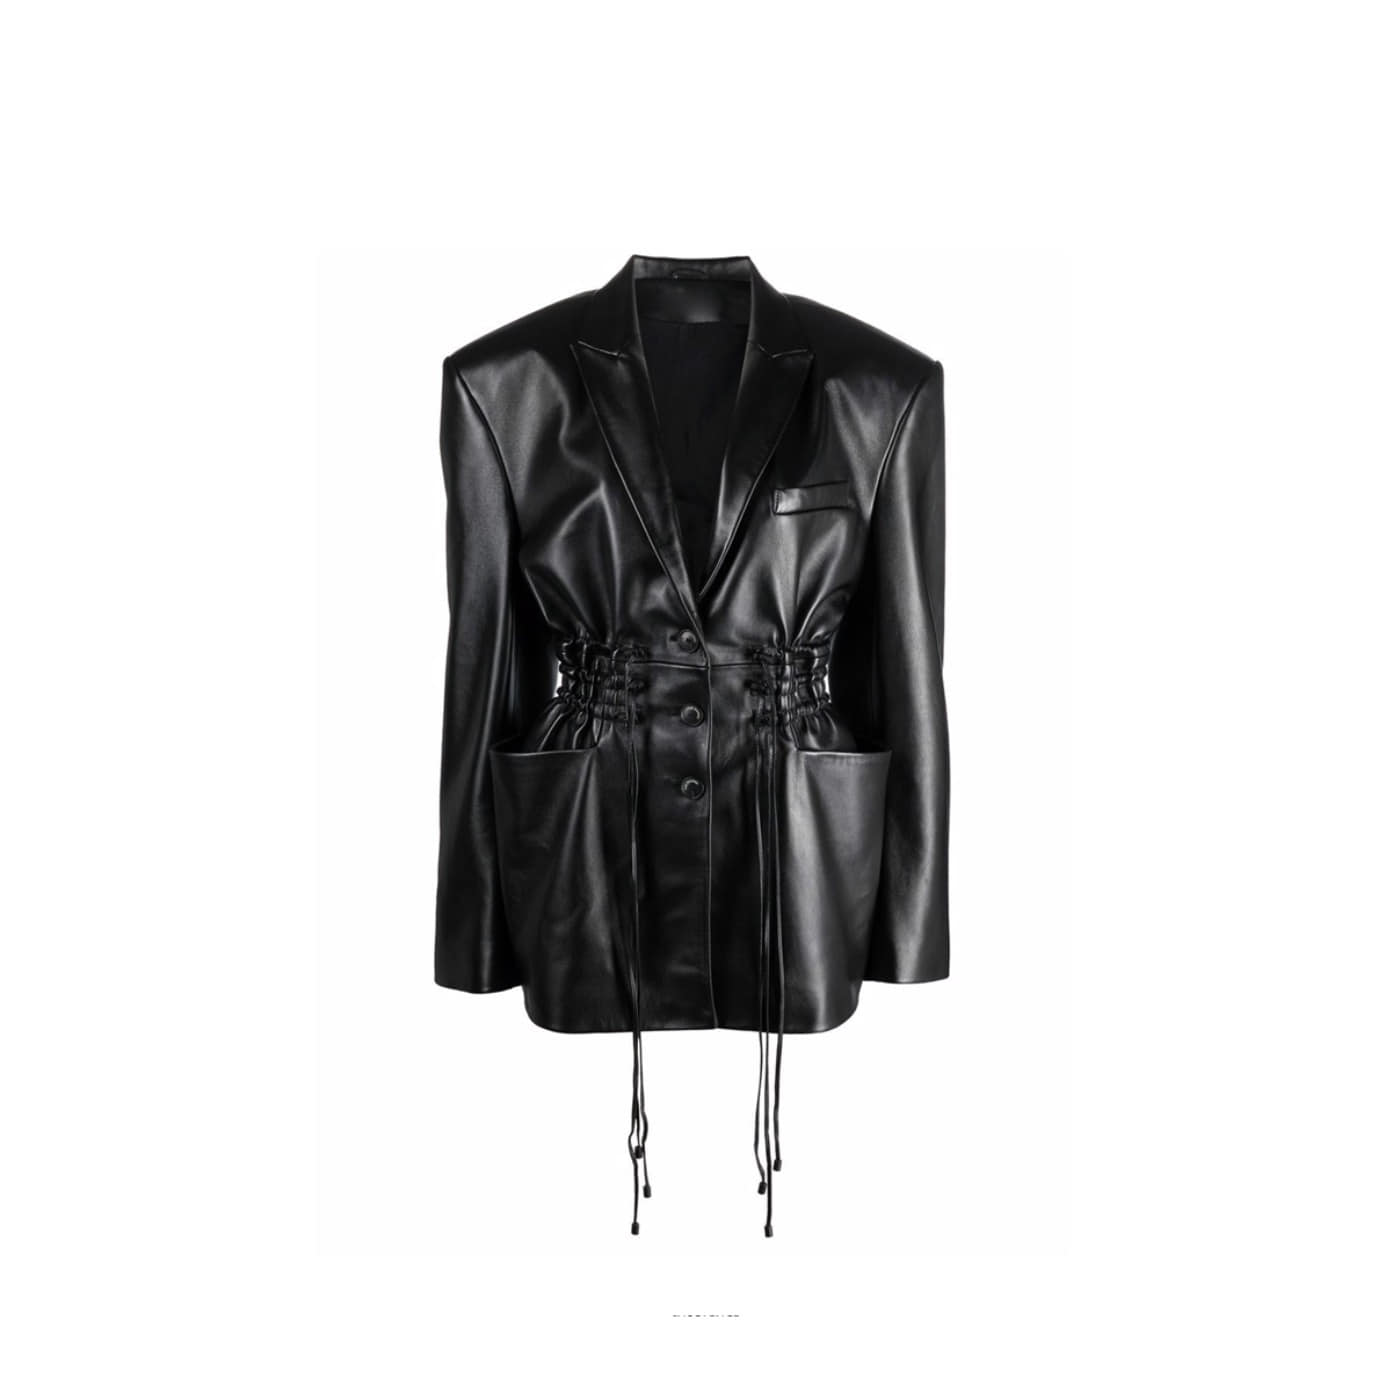 Fitted-waist leather jacket